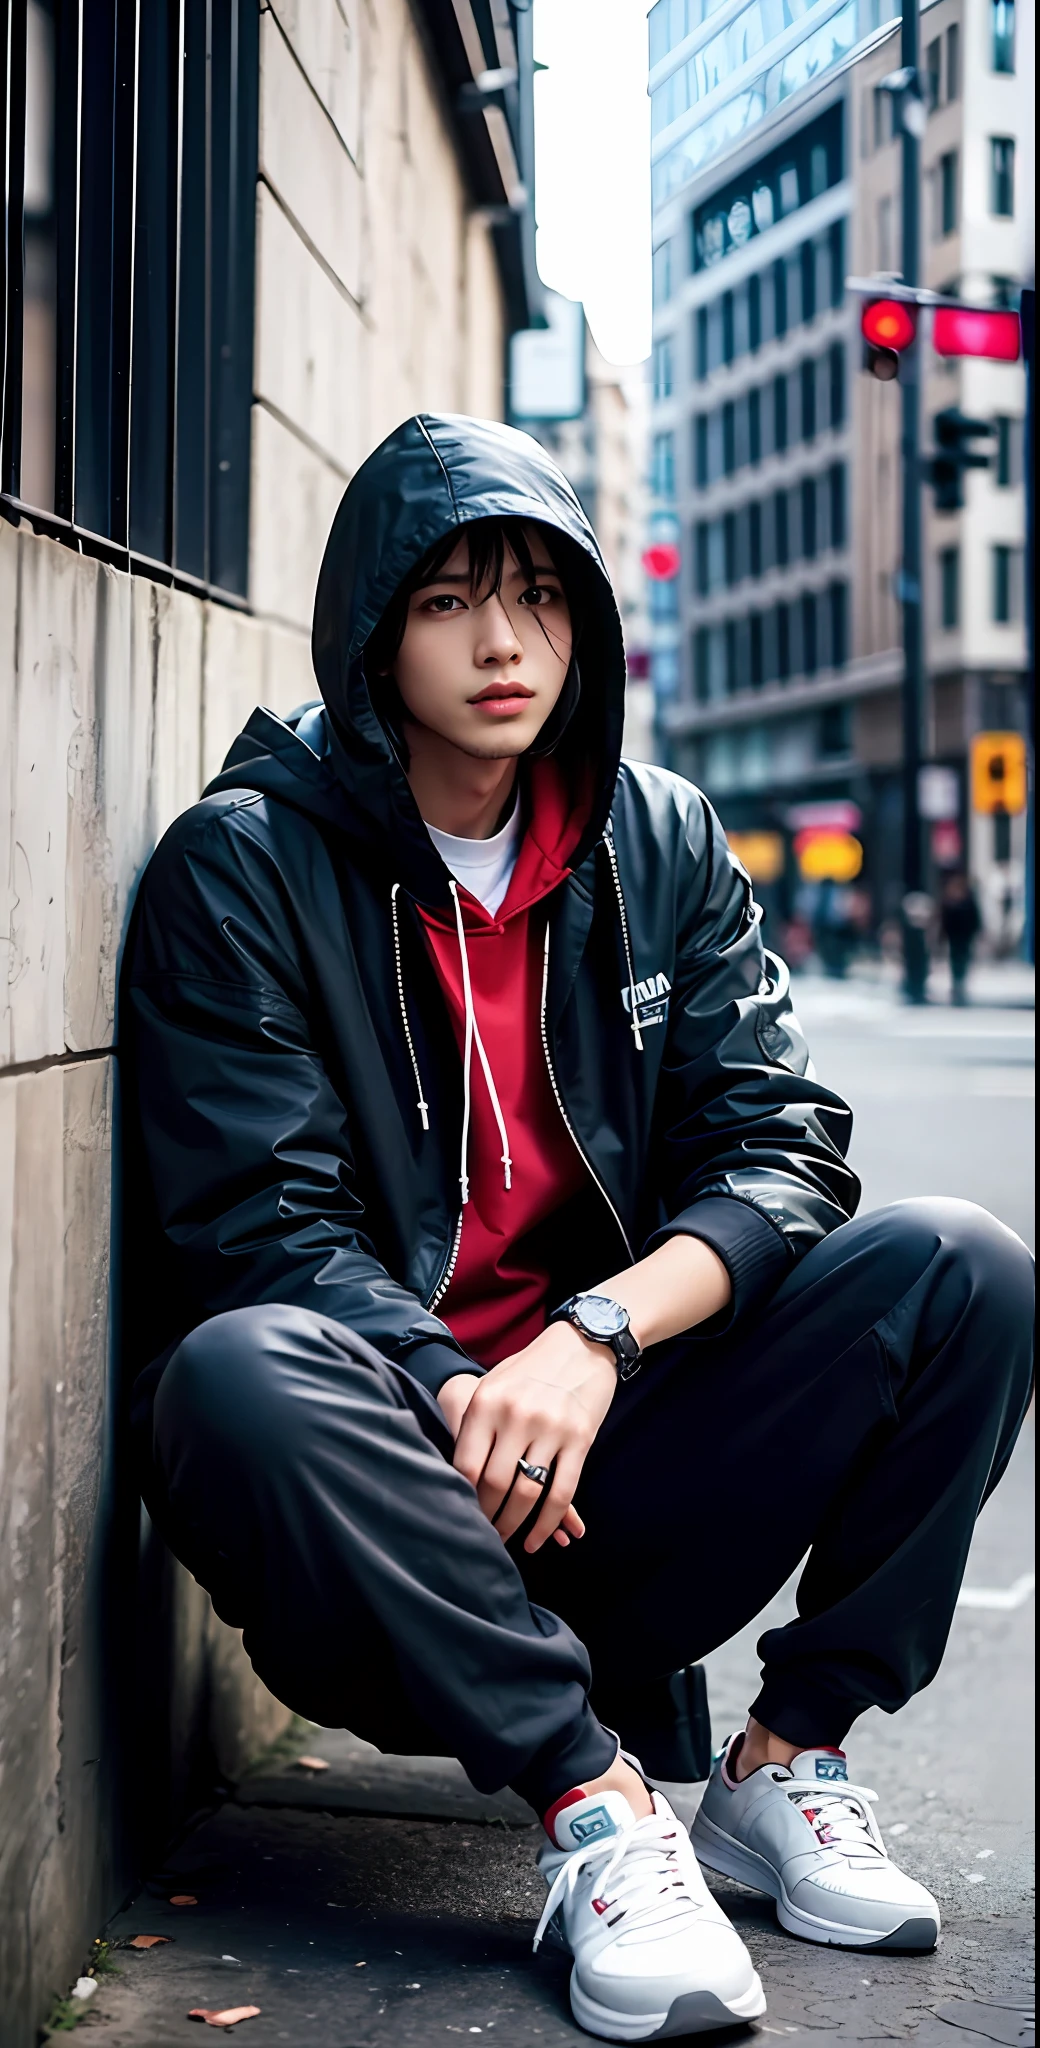 a masterpiece，Bestquality，offical art，8kwallpaper，Extremely Detailed，Illustration，1man，Trendy outfits，watch，sneaker shoes，sit，Hands droop naturally，Hooded jacket，Street,long pants black,